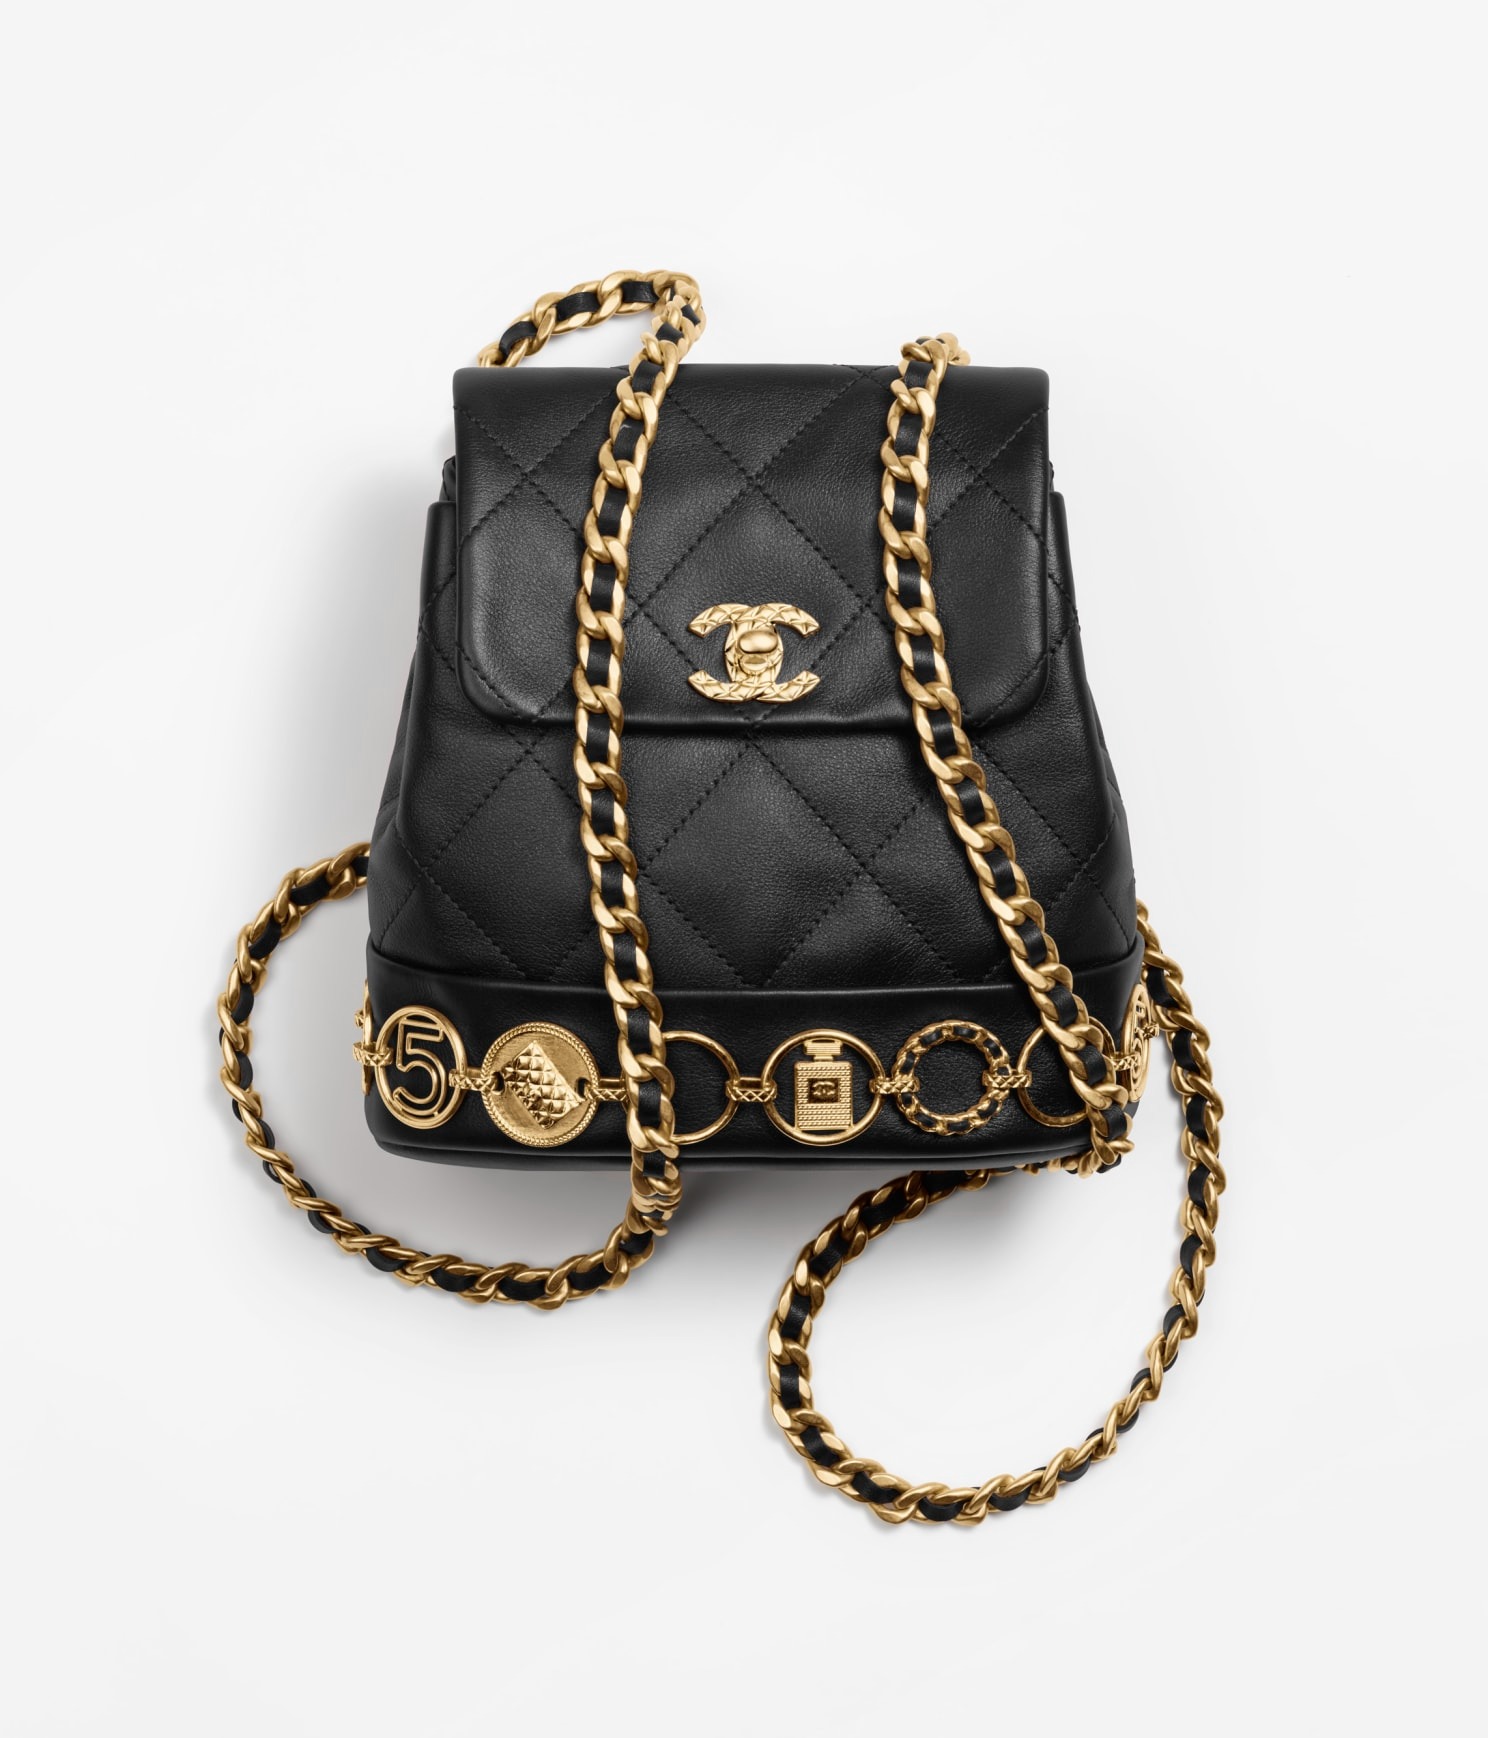 Tips for Buying a Vintage Chanel Bag